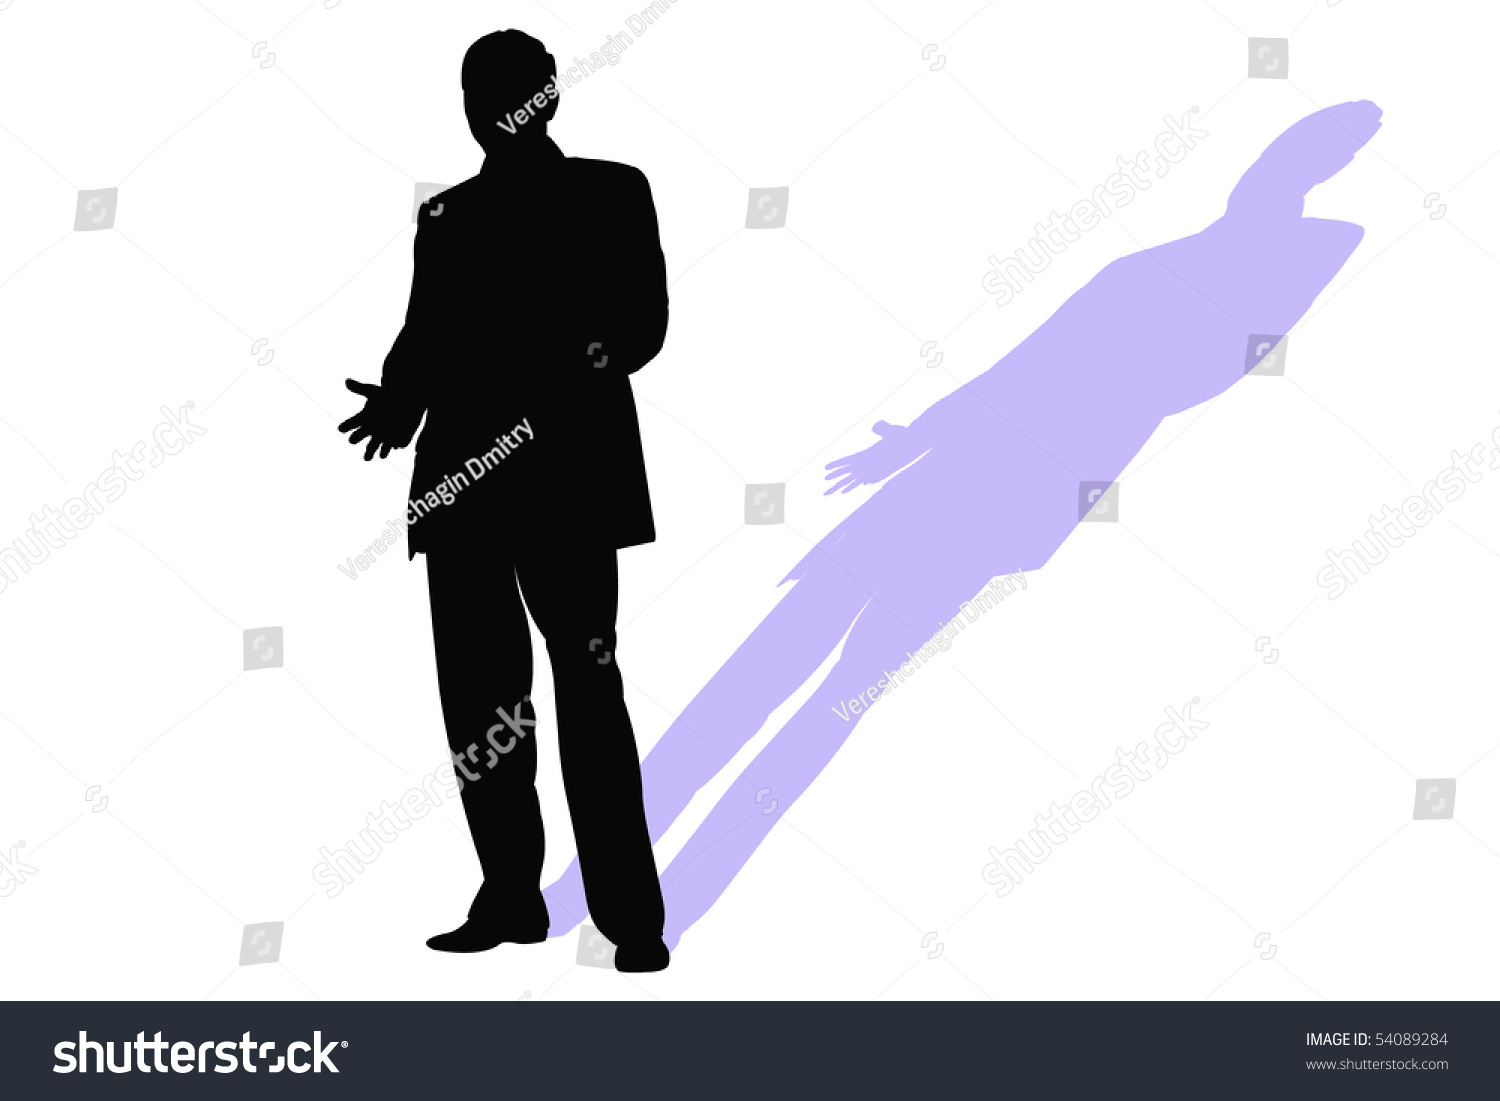 Vector Illustration Of Man Silhouette And His Shadow - 54089284